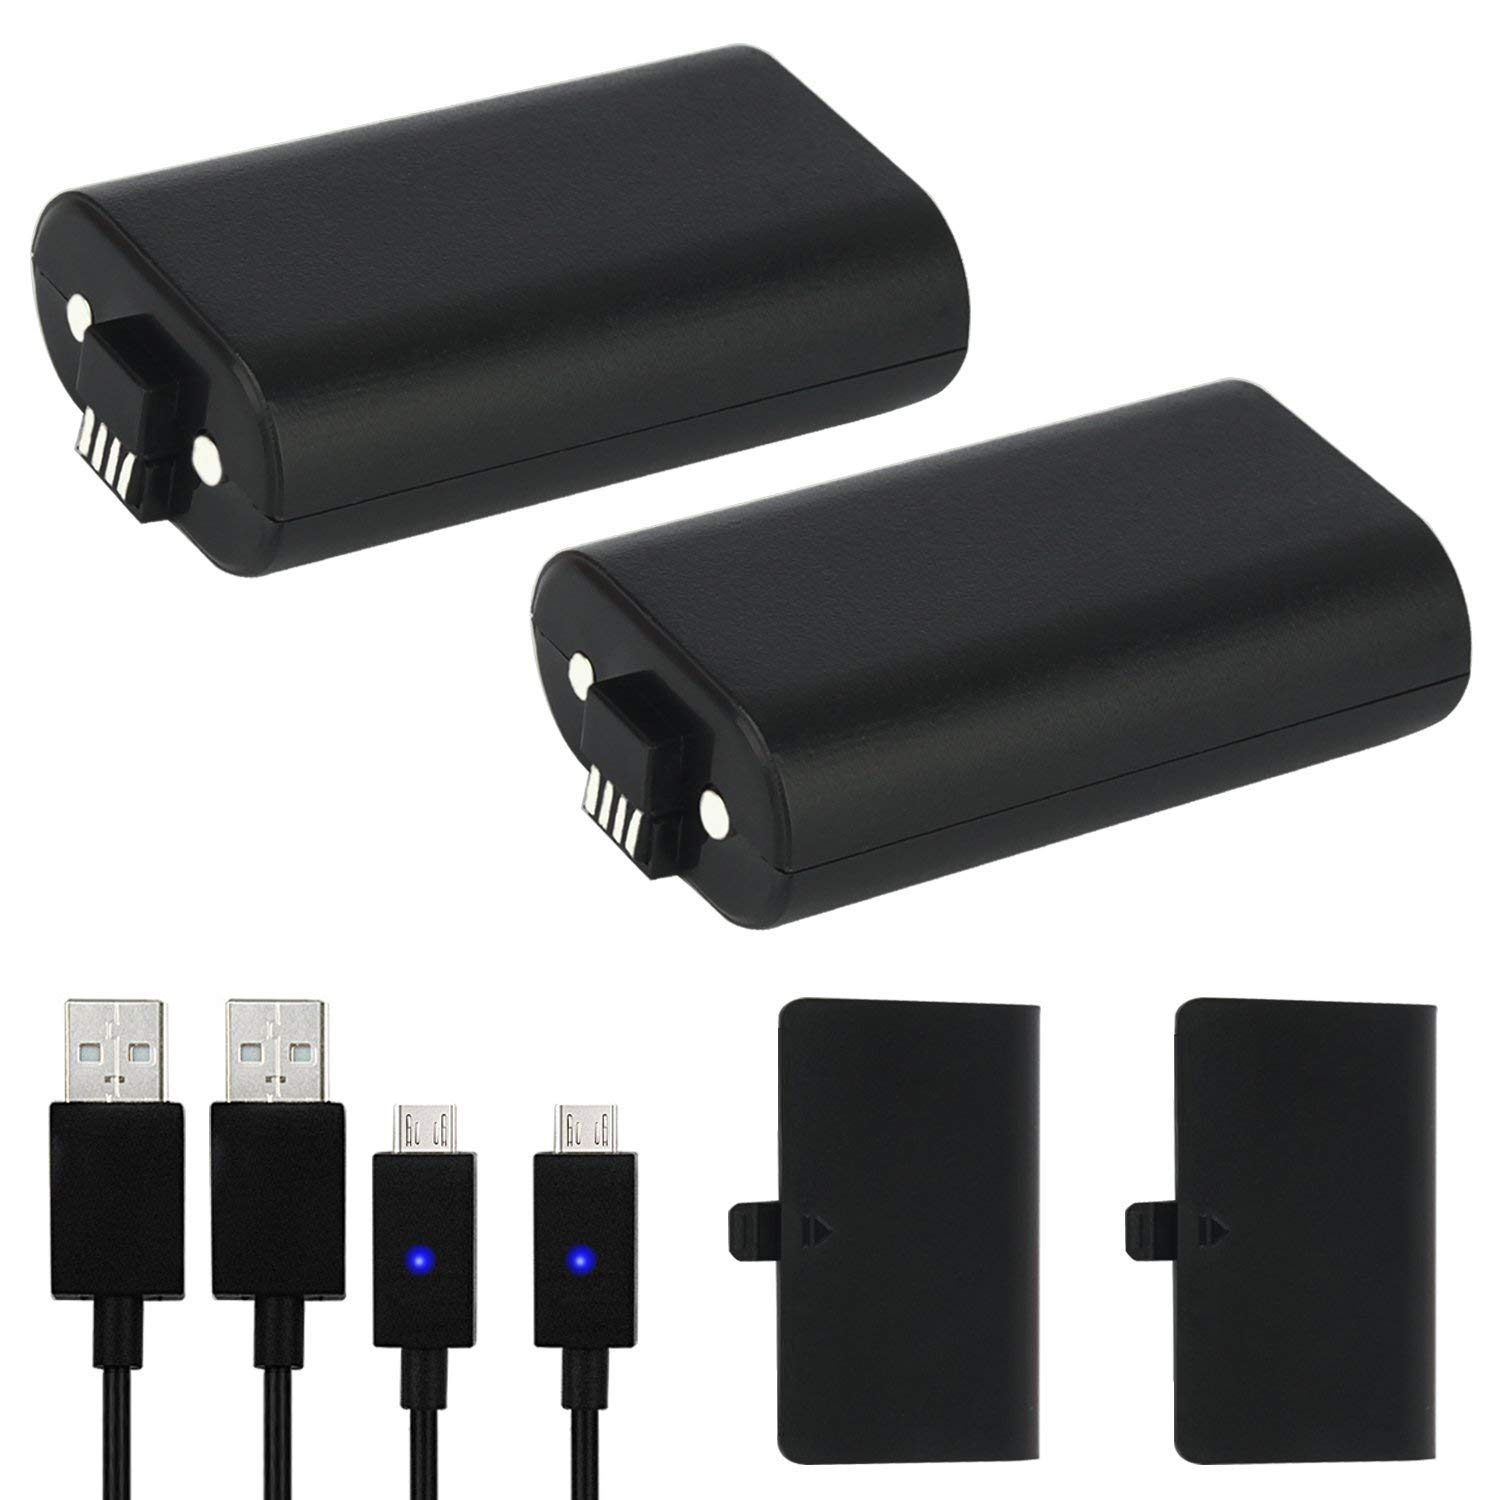 Xbox One Battery Pack, 2 1200 mAh Rechargeable Batteries and 5FT Micro USB Cable with LED for Xbox One/X/S/Elite